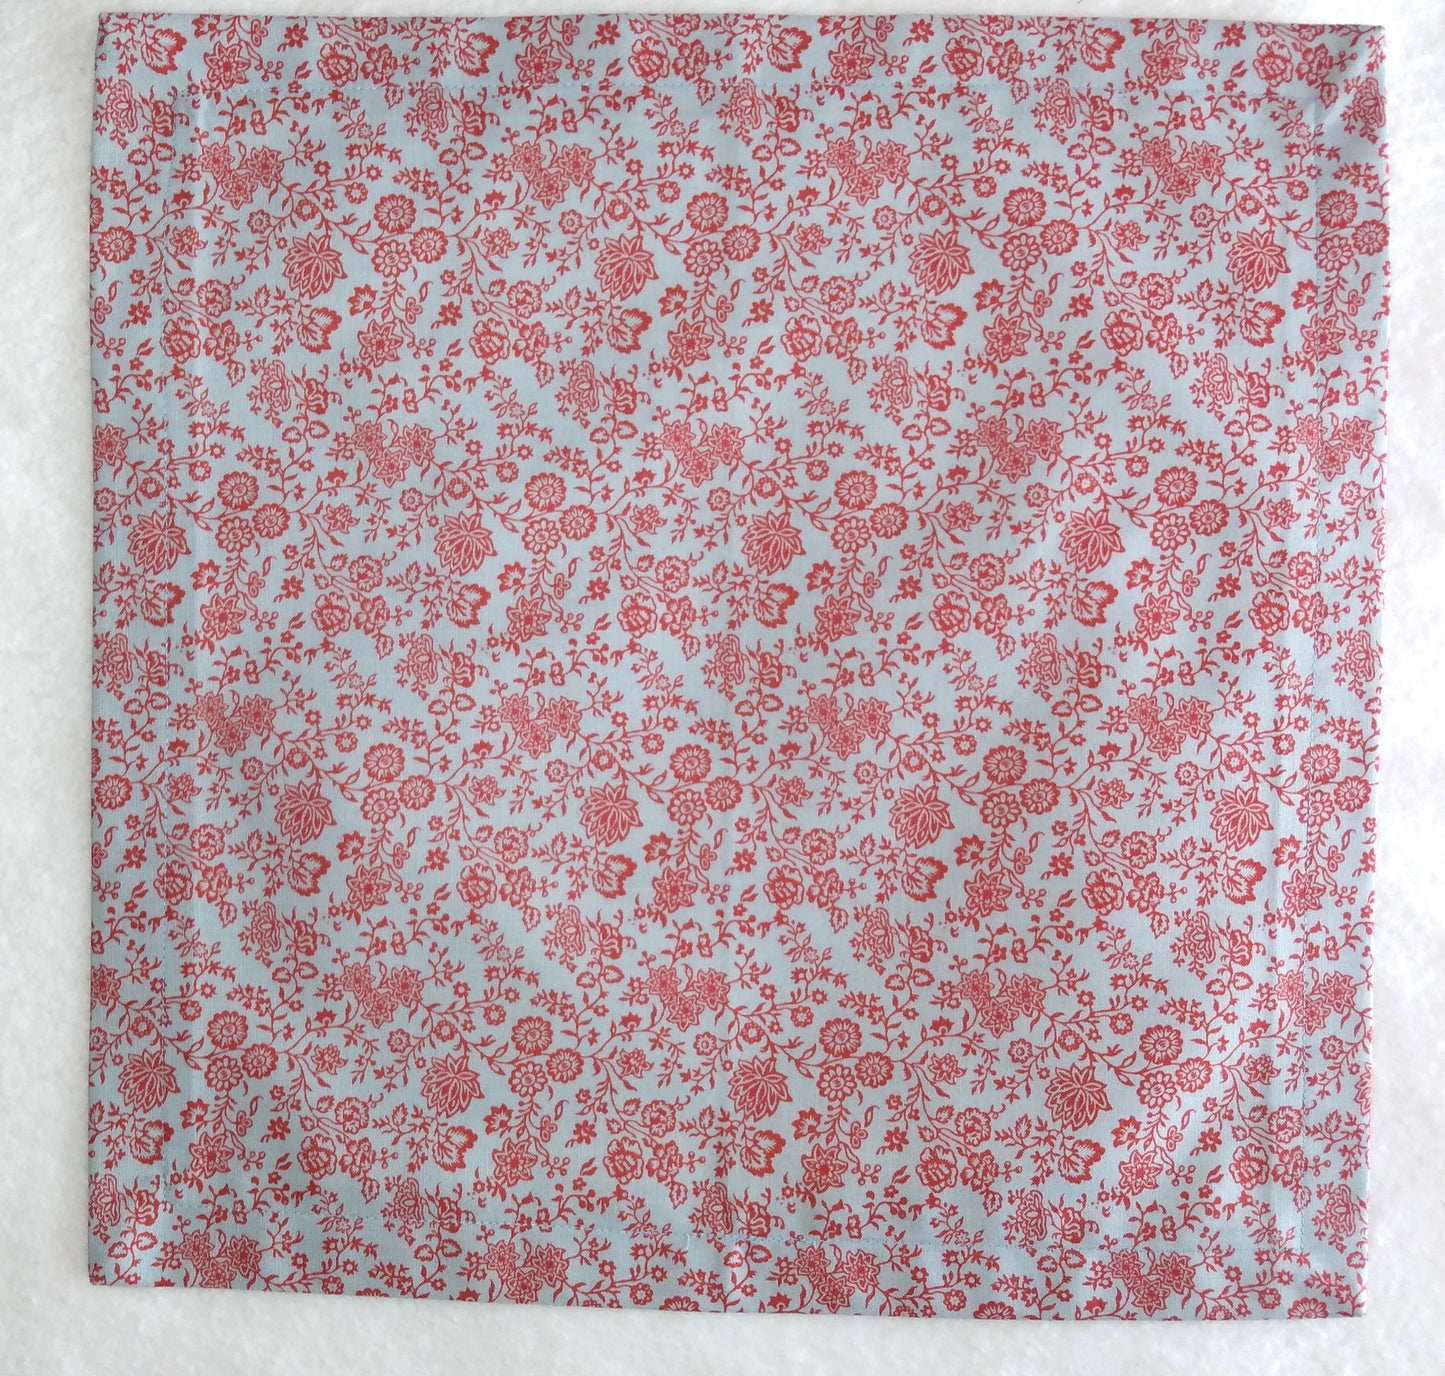 Napkins 100% Liberty Print Cotton Red Floral Light Blue 4 Lunch